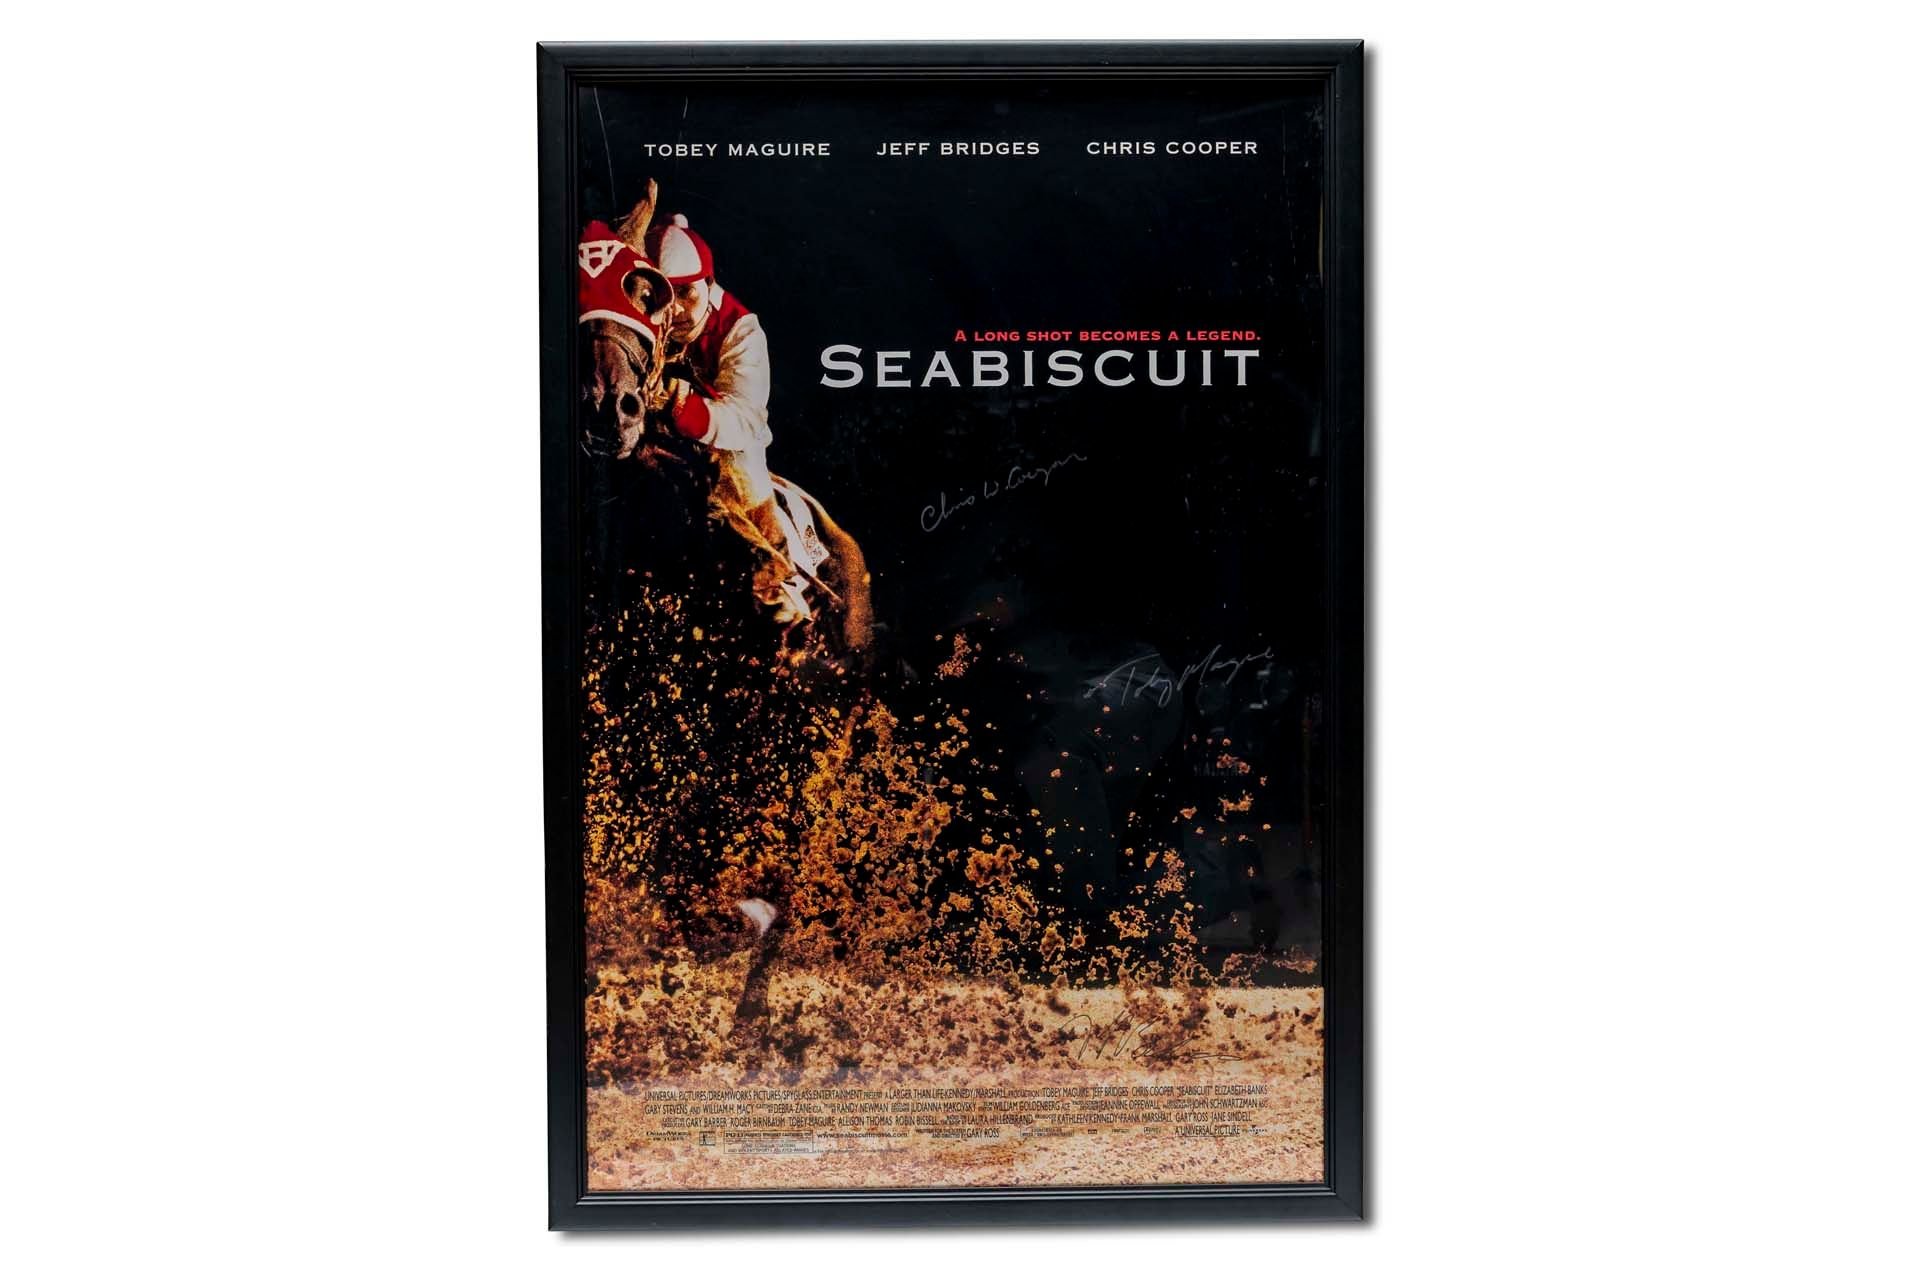 For Sale Framed Seabiscuit Movie Poster, Signed by Toby Maguire, Jeff Bridges, Chris Cooper